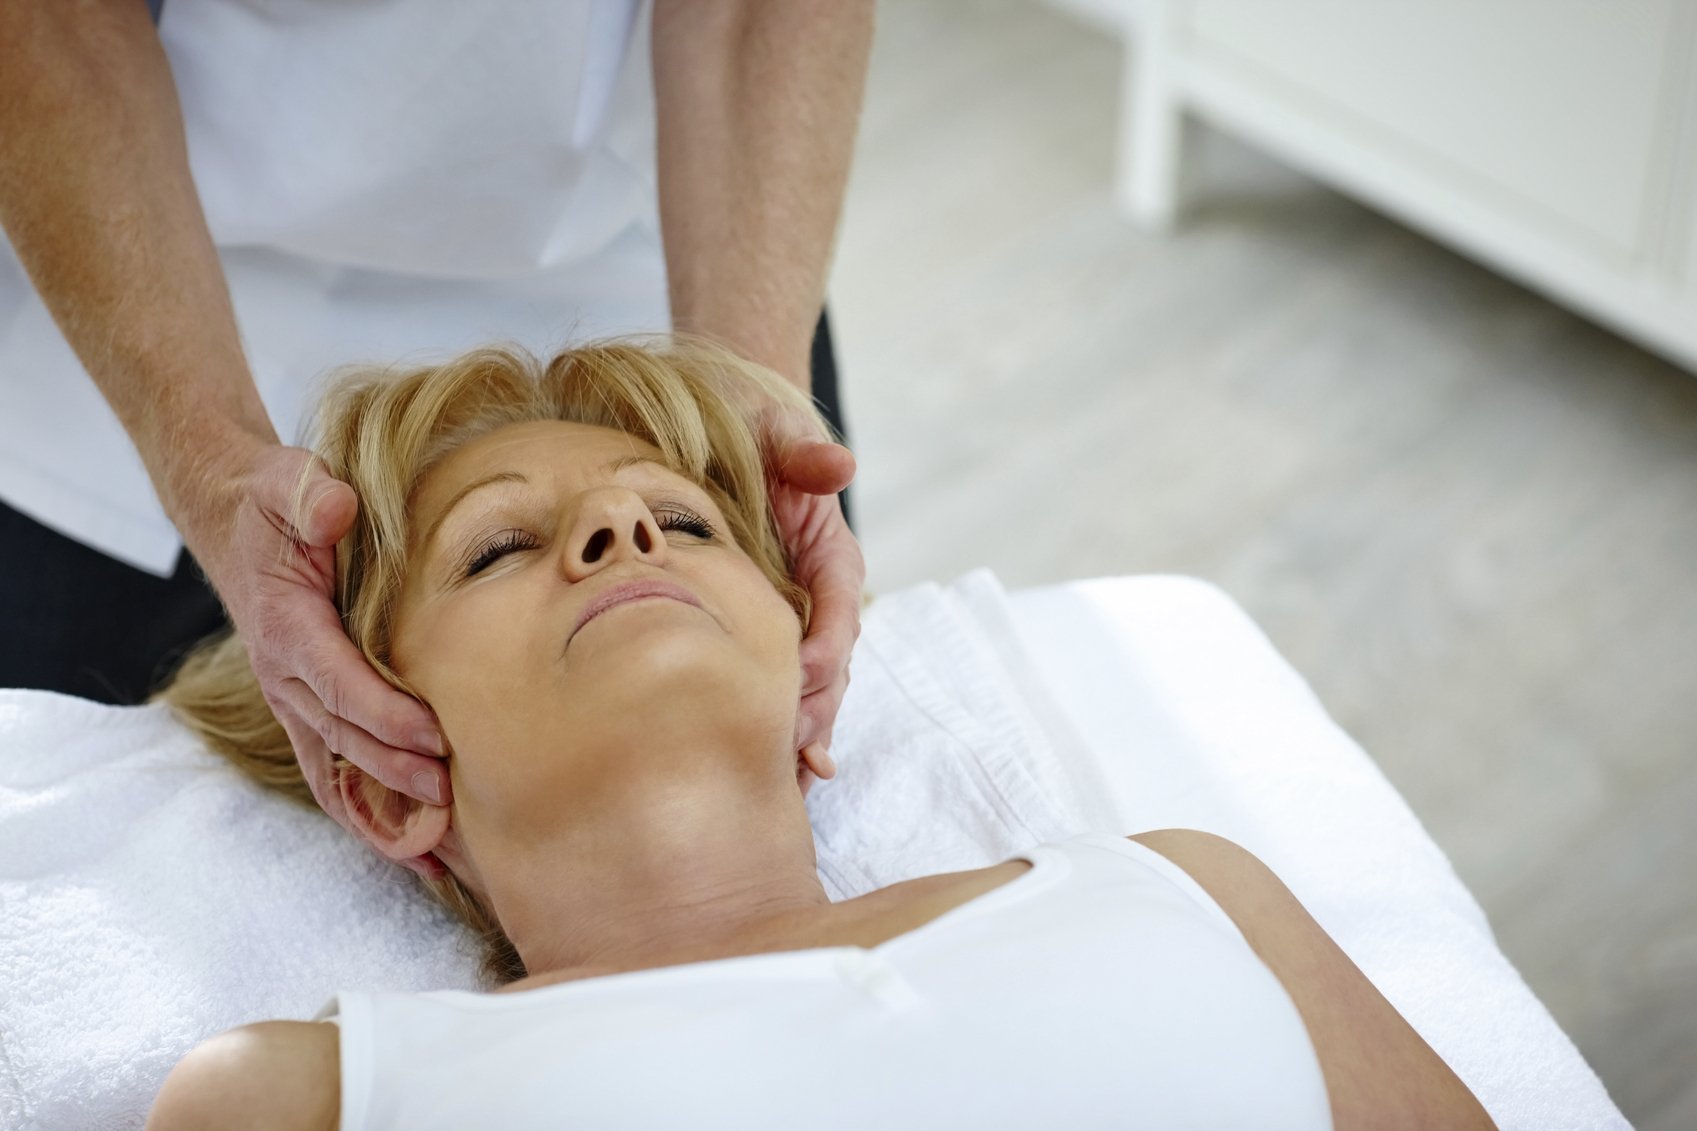 Mature woman lying on table receiving head massage from osteopath therapist